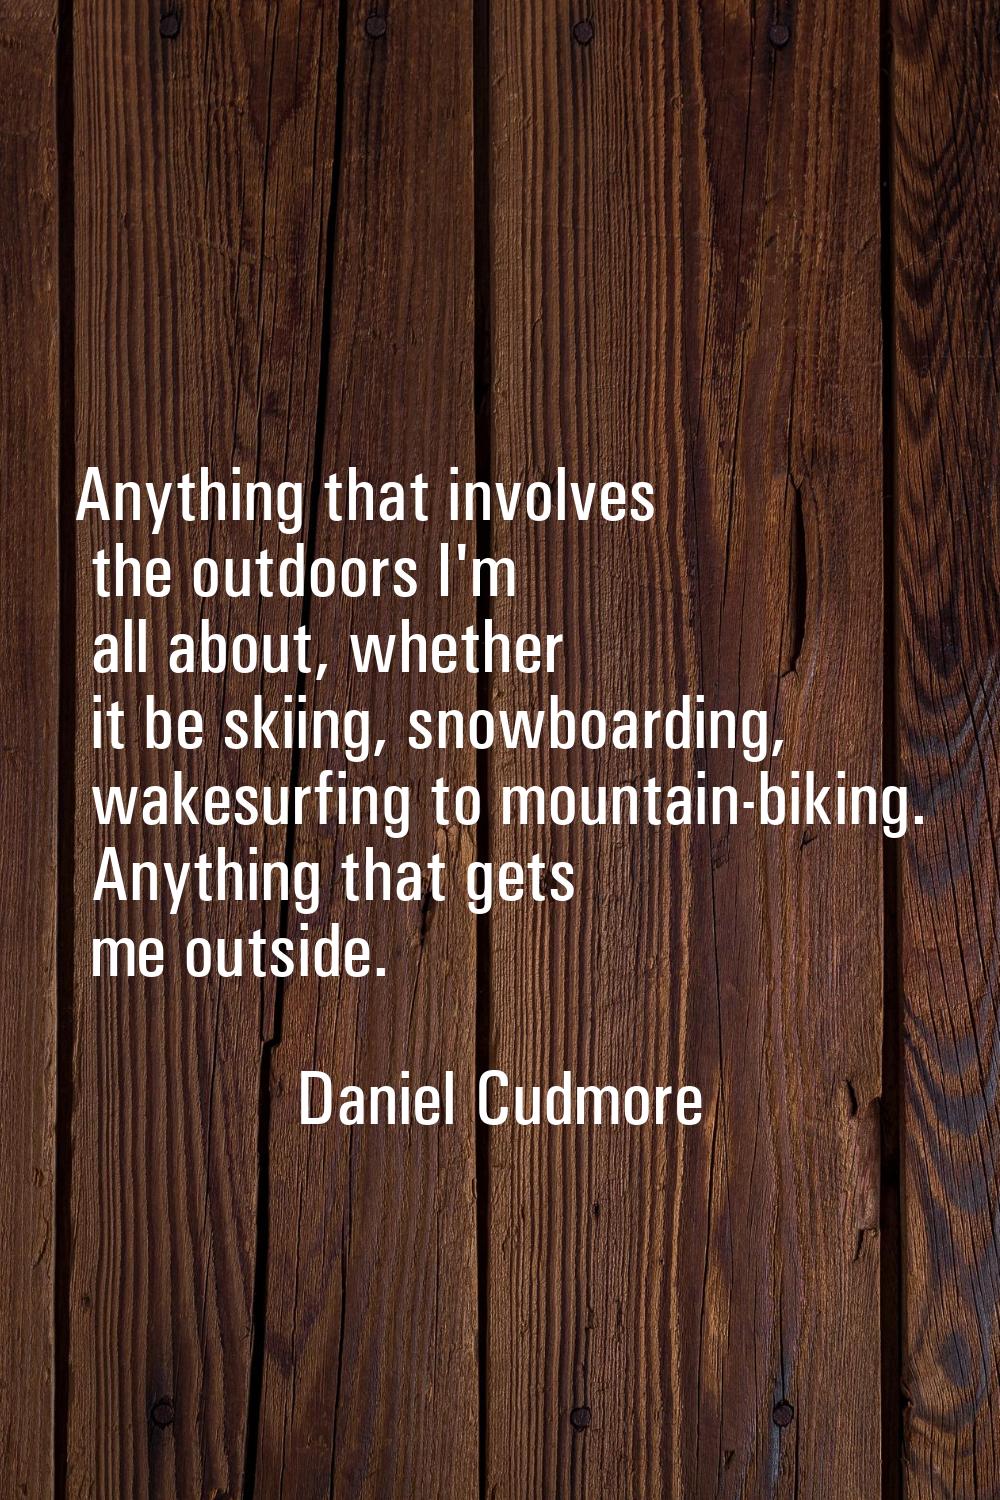 Anything that involves the outdoors I'm all about, whether it be skiing, snowboarding, wakesurfing 